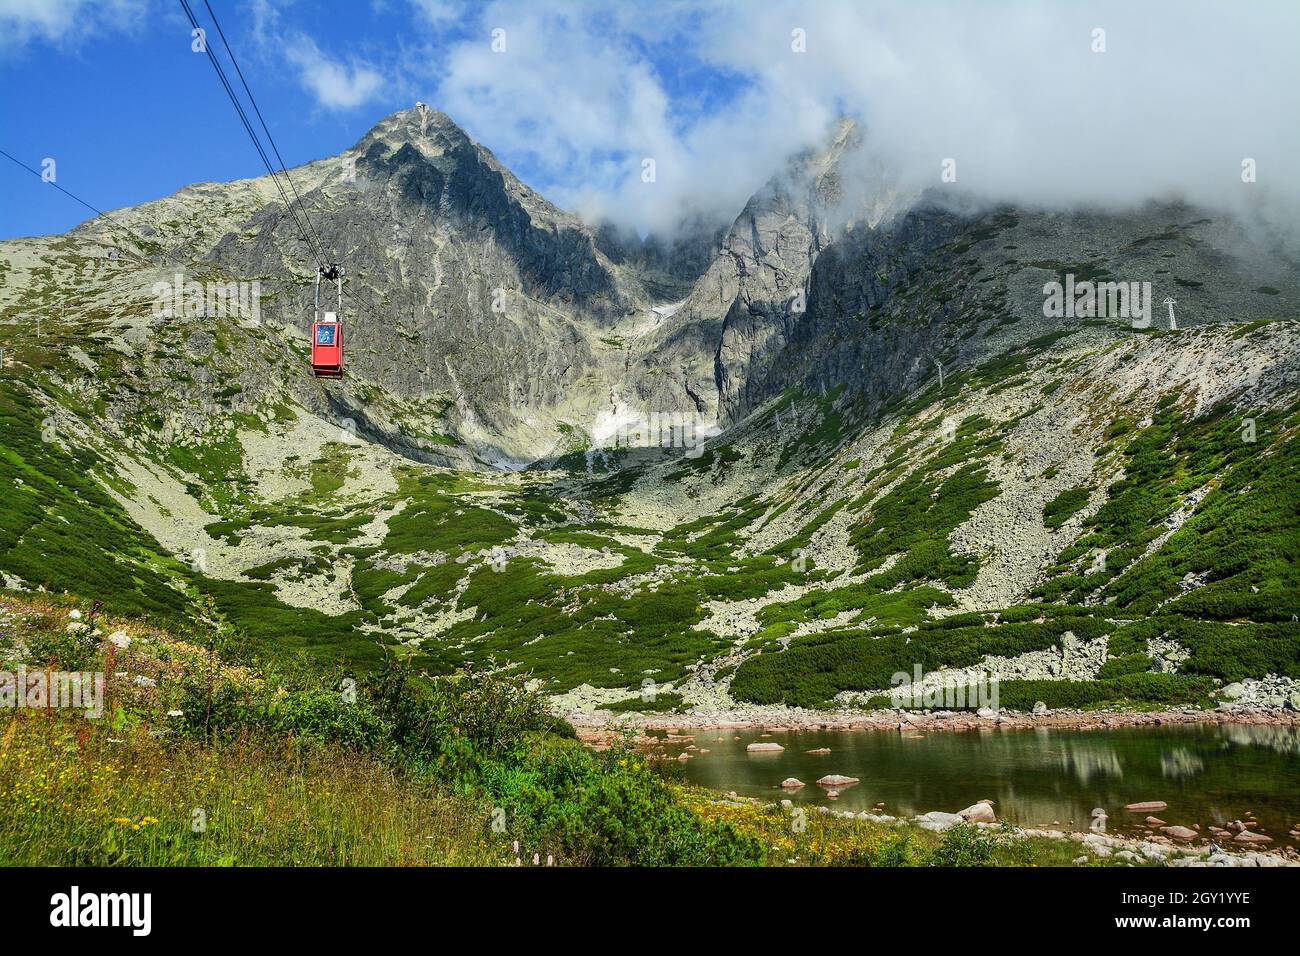 Red cable car from the Tatra Mountains to the Lomnicky Peak. Beautiful mountain landscape in Slovakia. Stock Photo